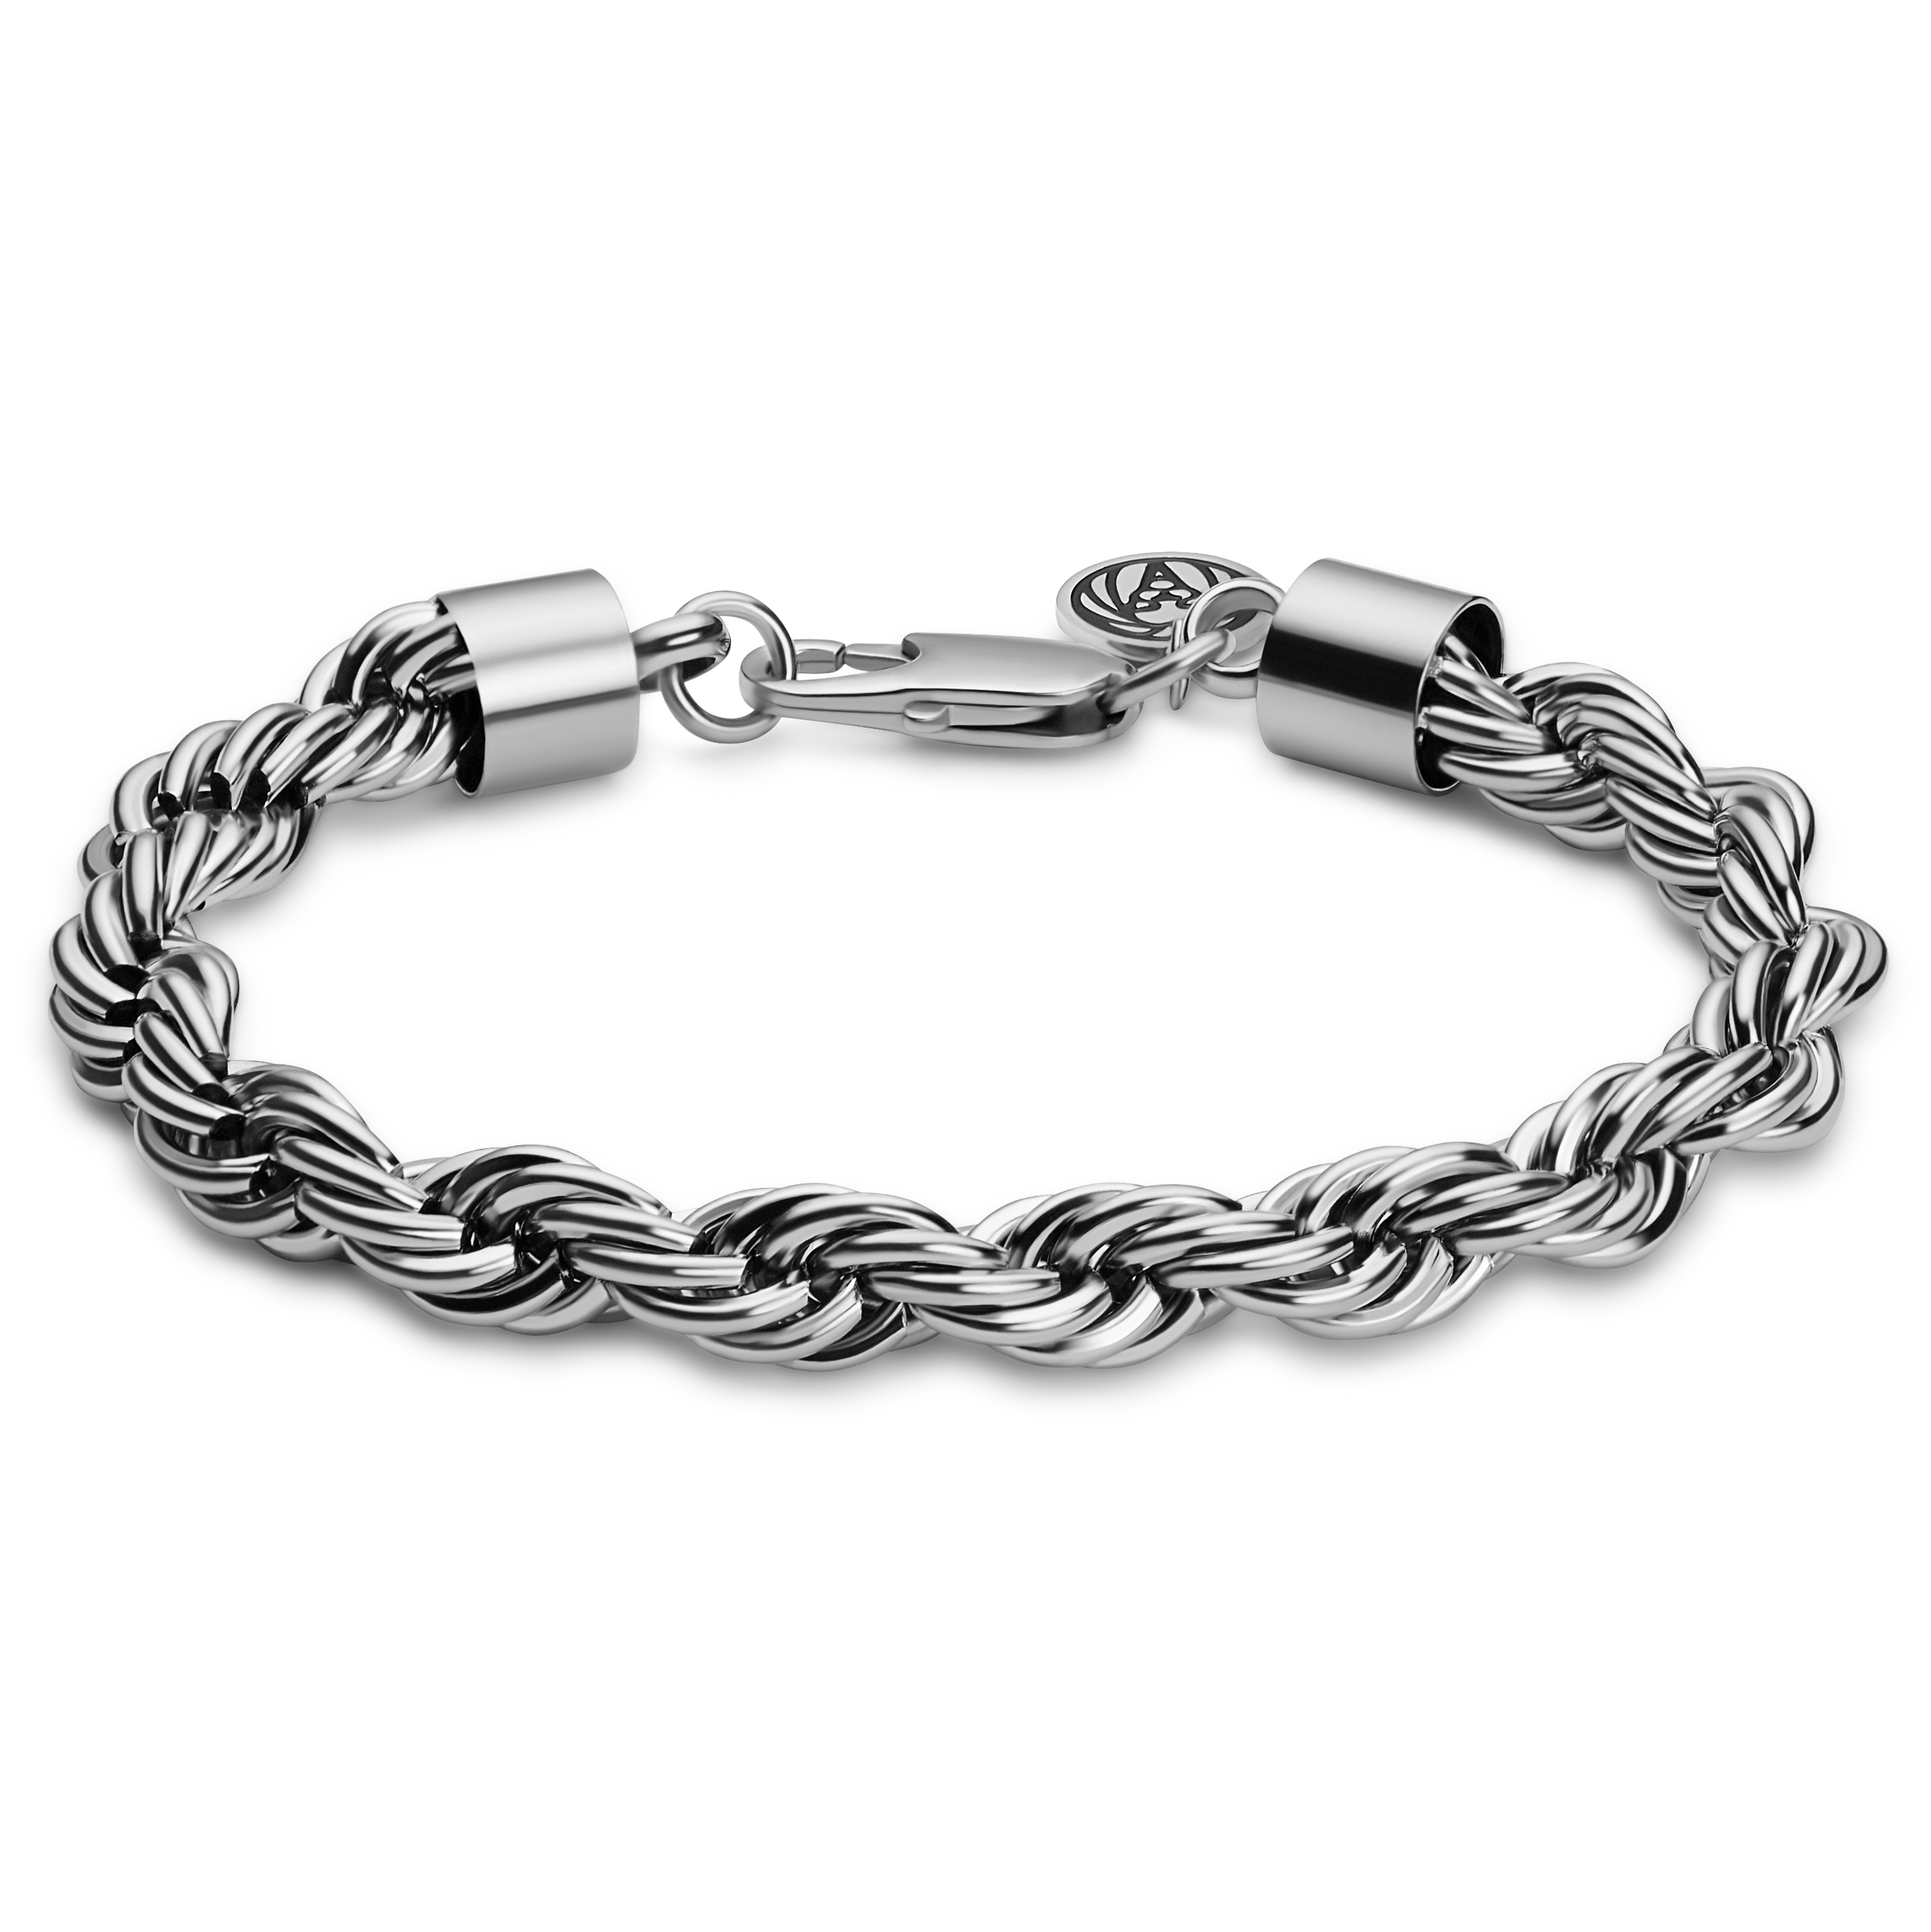 Buy Stainless Steel Bracelet With Gold Stainless Steel Rope New Online in  India - Etsy